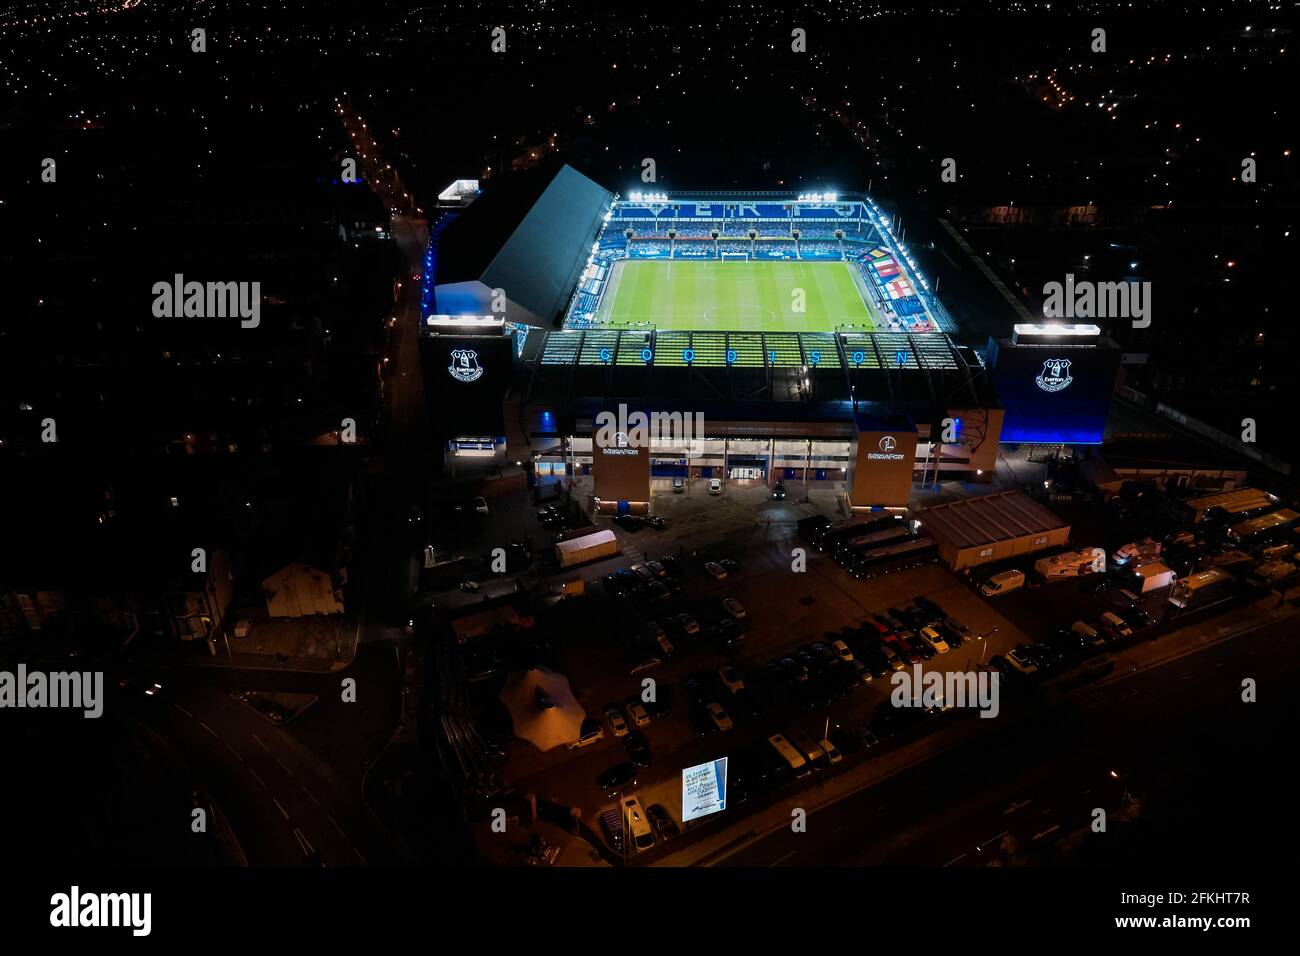 A general view of Goodison Park at night with the floodlights on after a football match showing the stadium in it’s urban setting Stock Photo